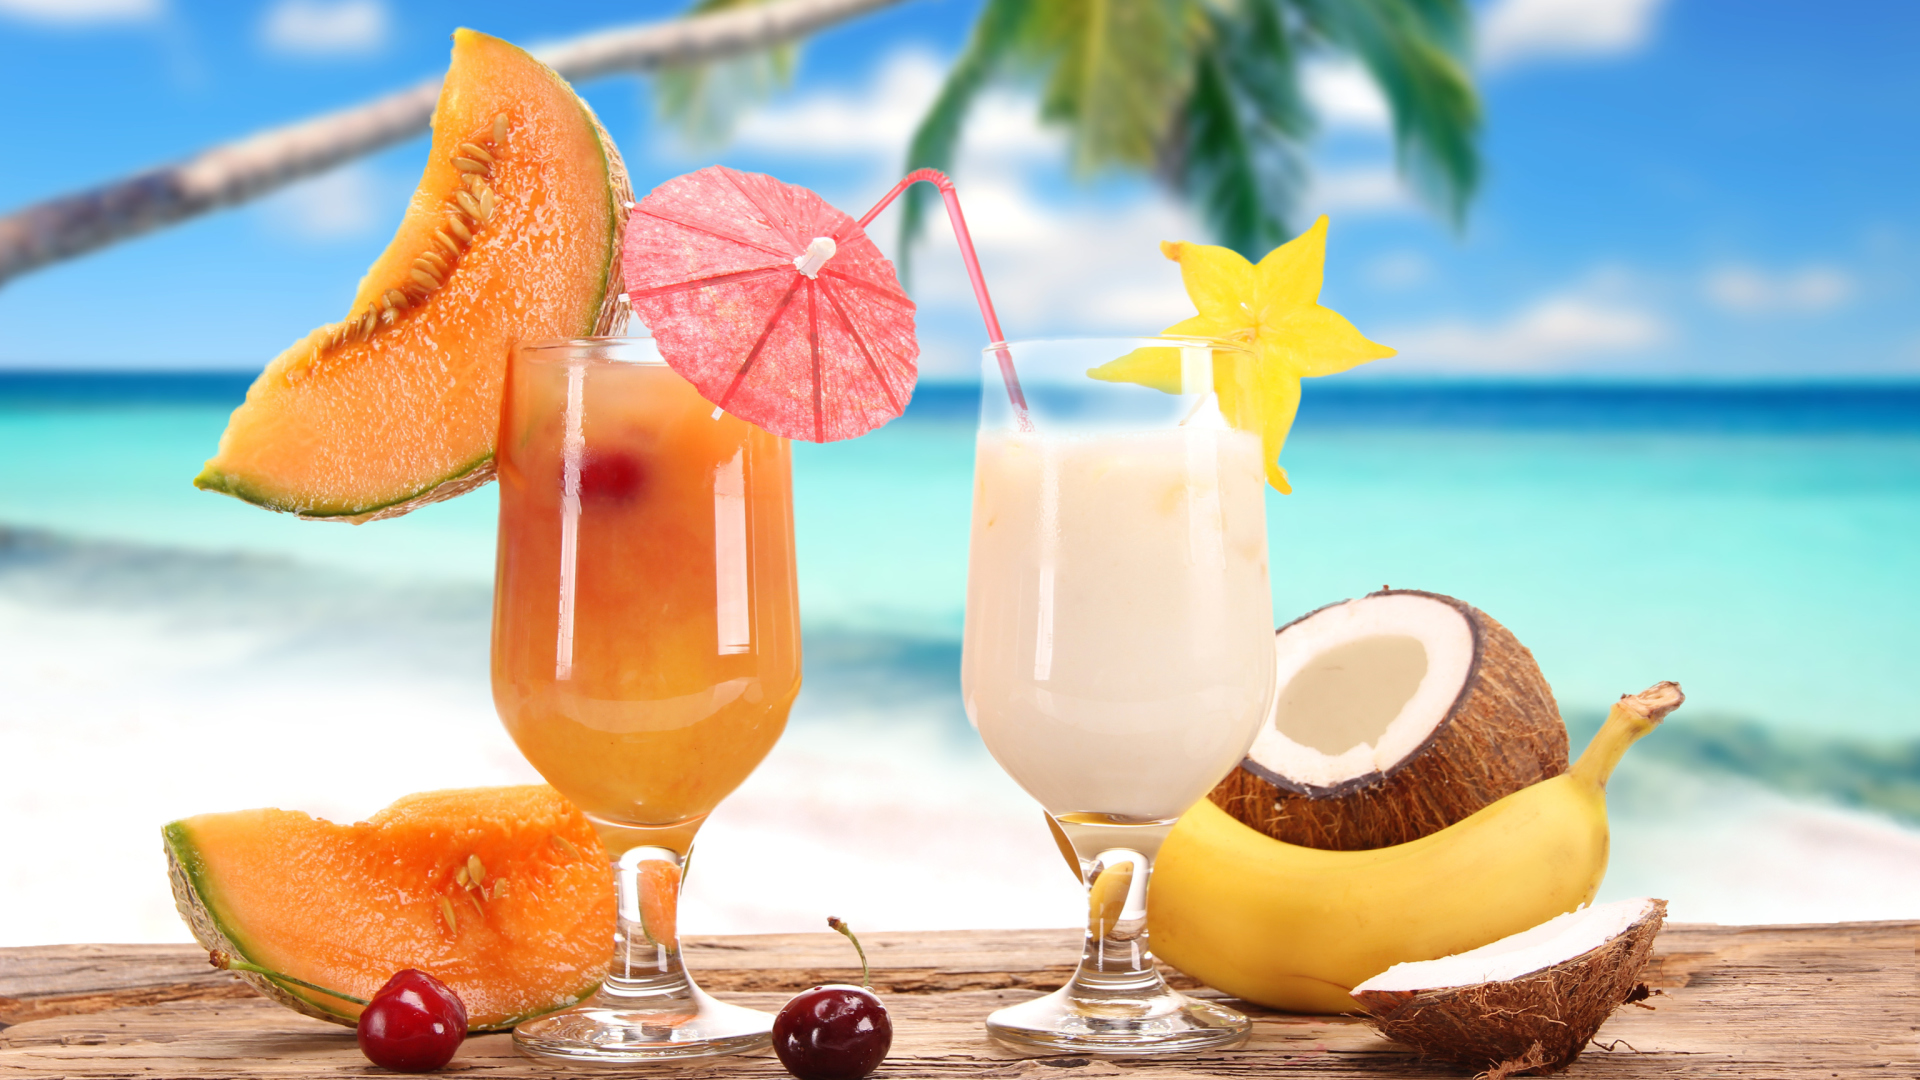 Tropical Cocktail wallpaper 1920x1080